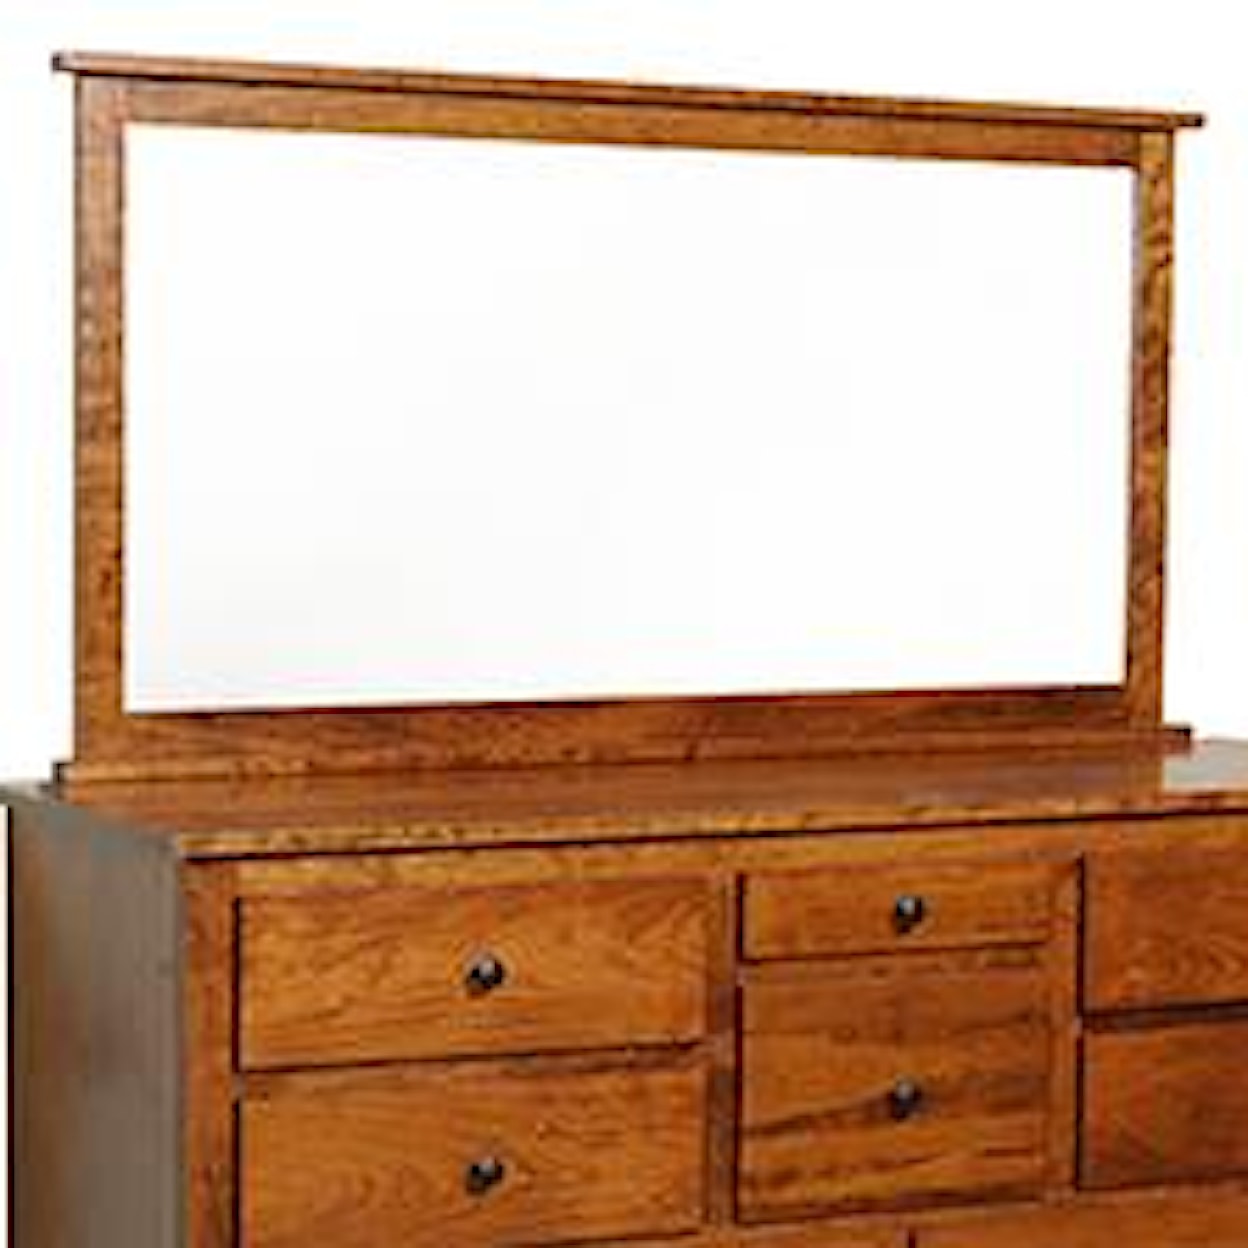 The Urban Collection Jamestown Square Mirror for High Dresser